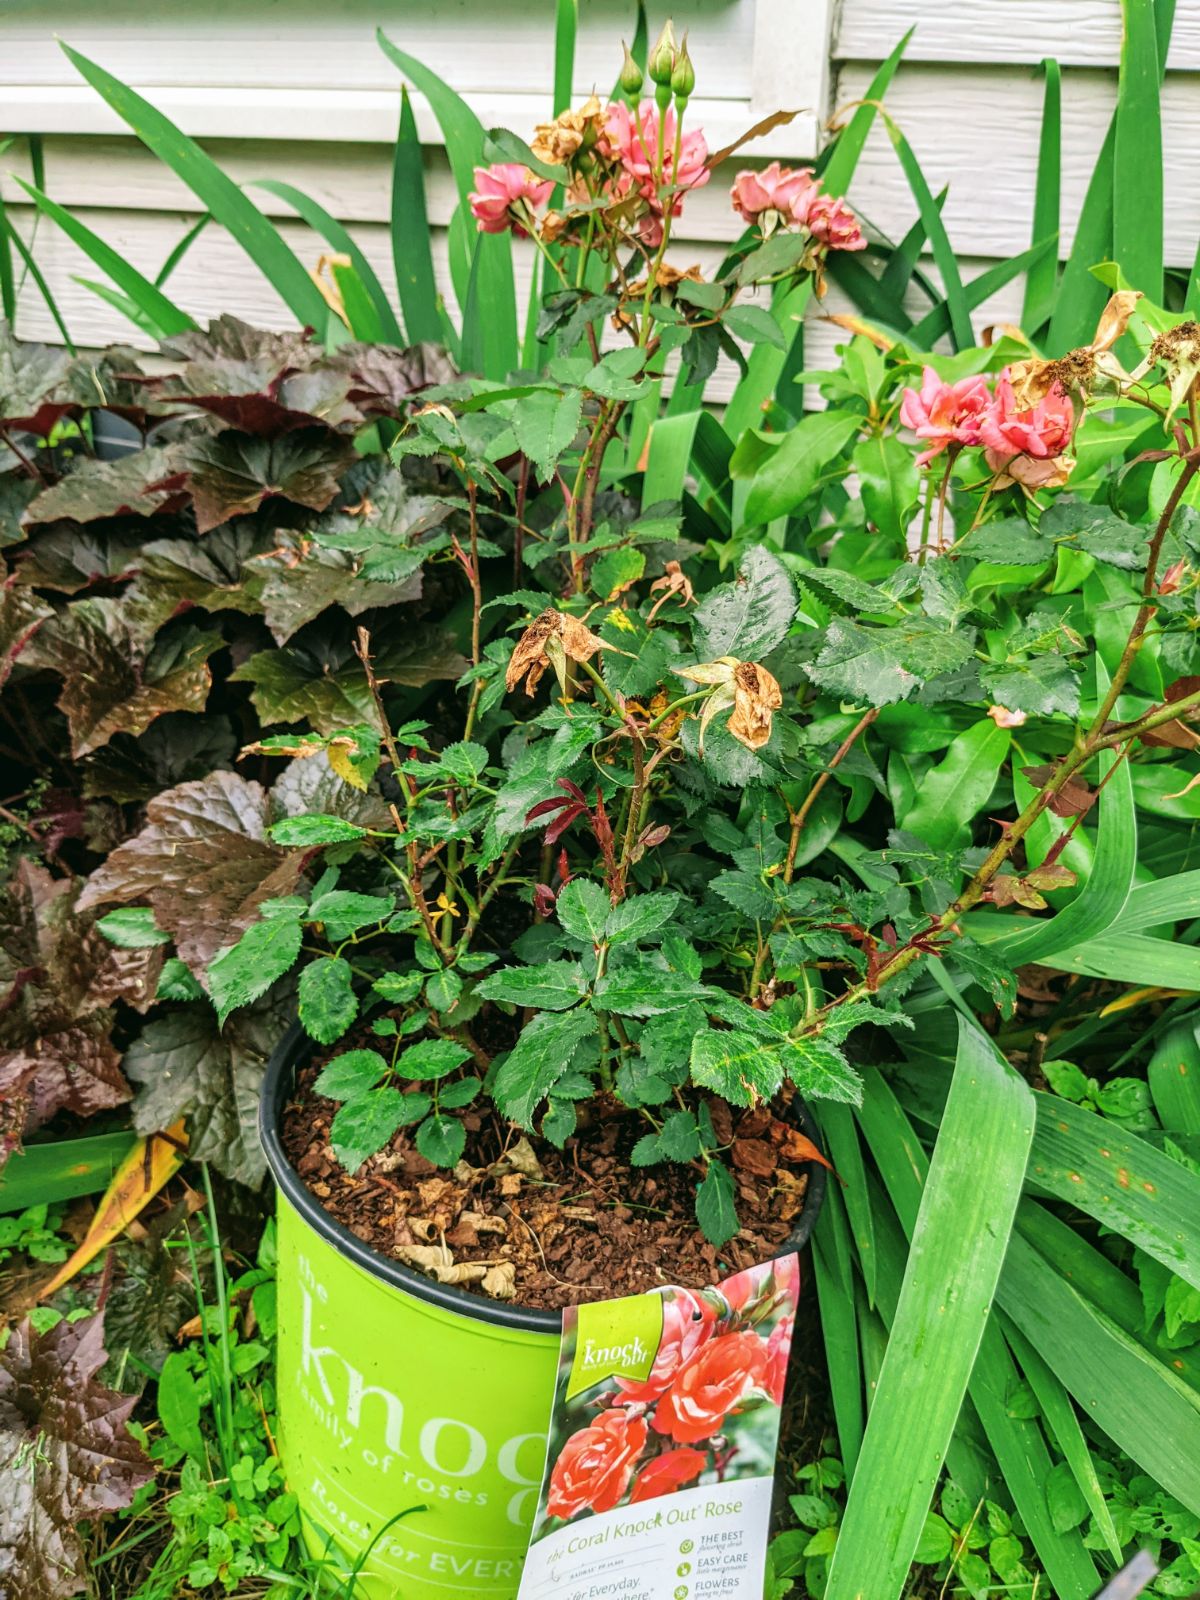 Coral Knockout rose bush in a container, needing to be deadheaded